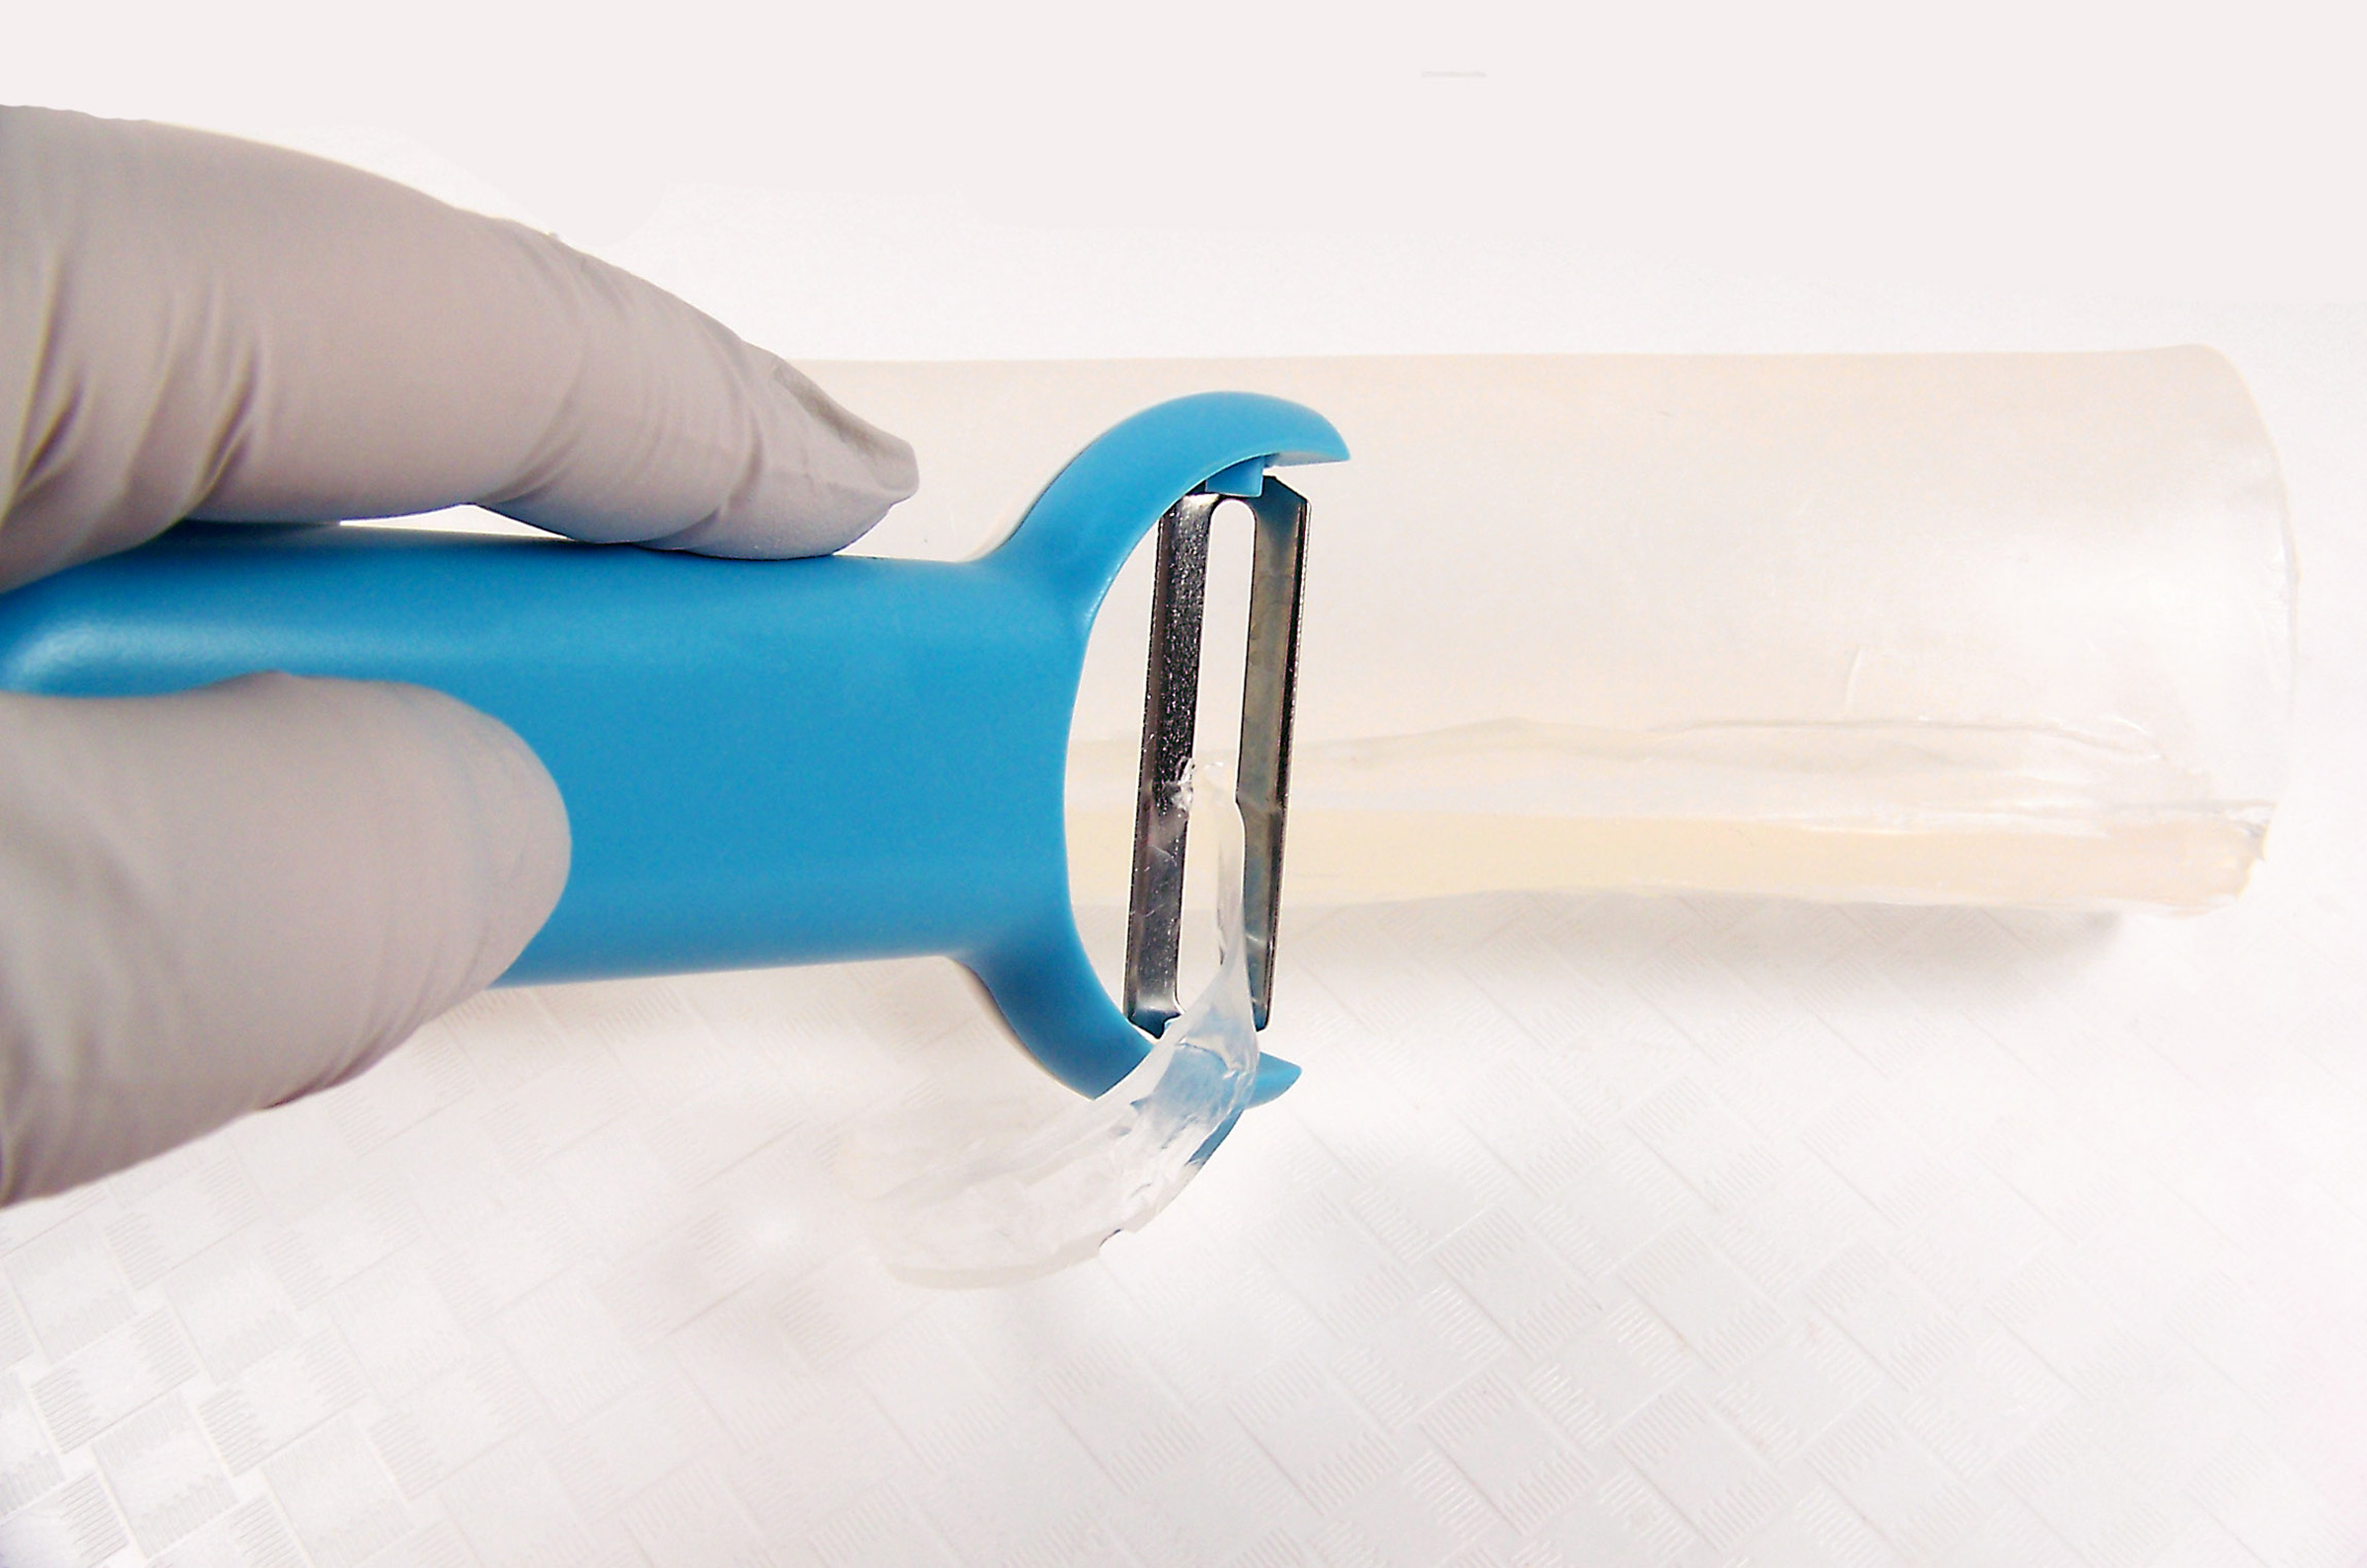 trim off excess soap with paring knife and vegetable peeler to create a smooth surface